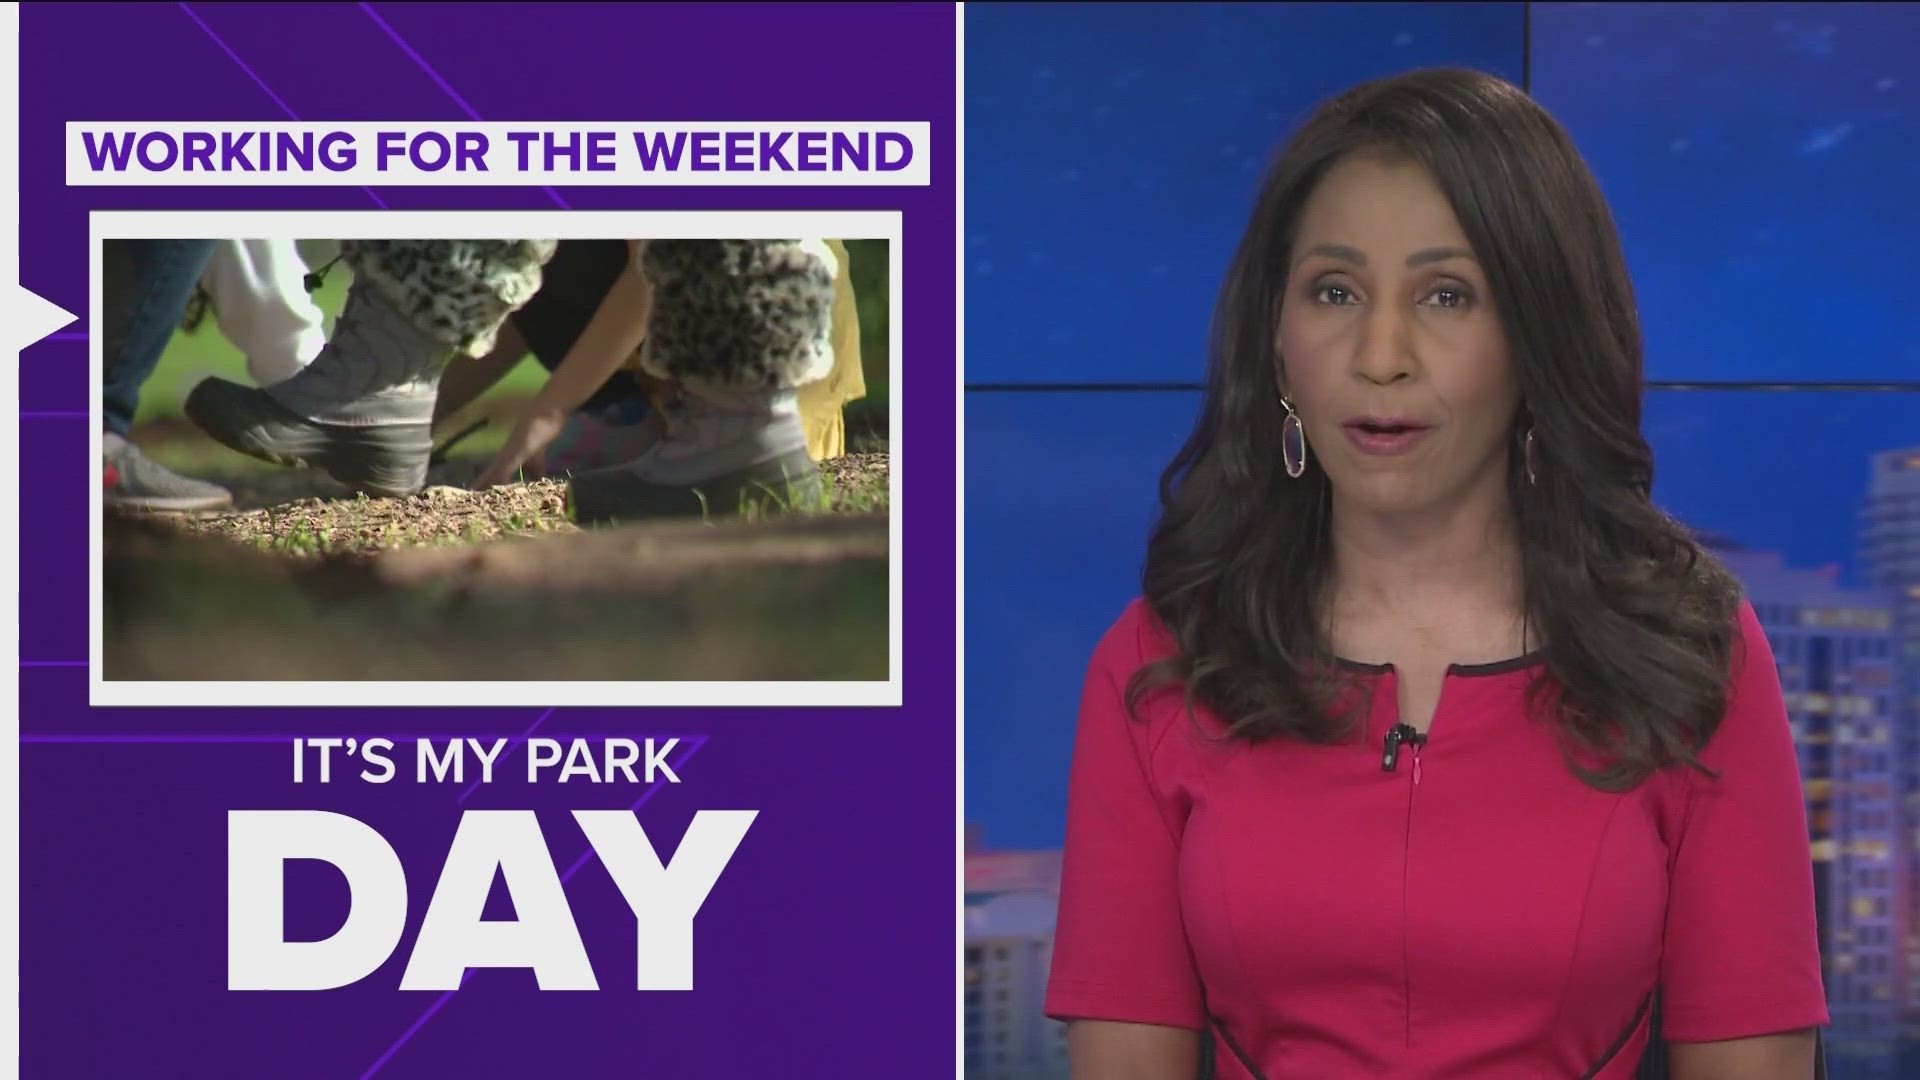 Here's a look at some of the events going on in the Austin area this weekend.